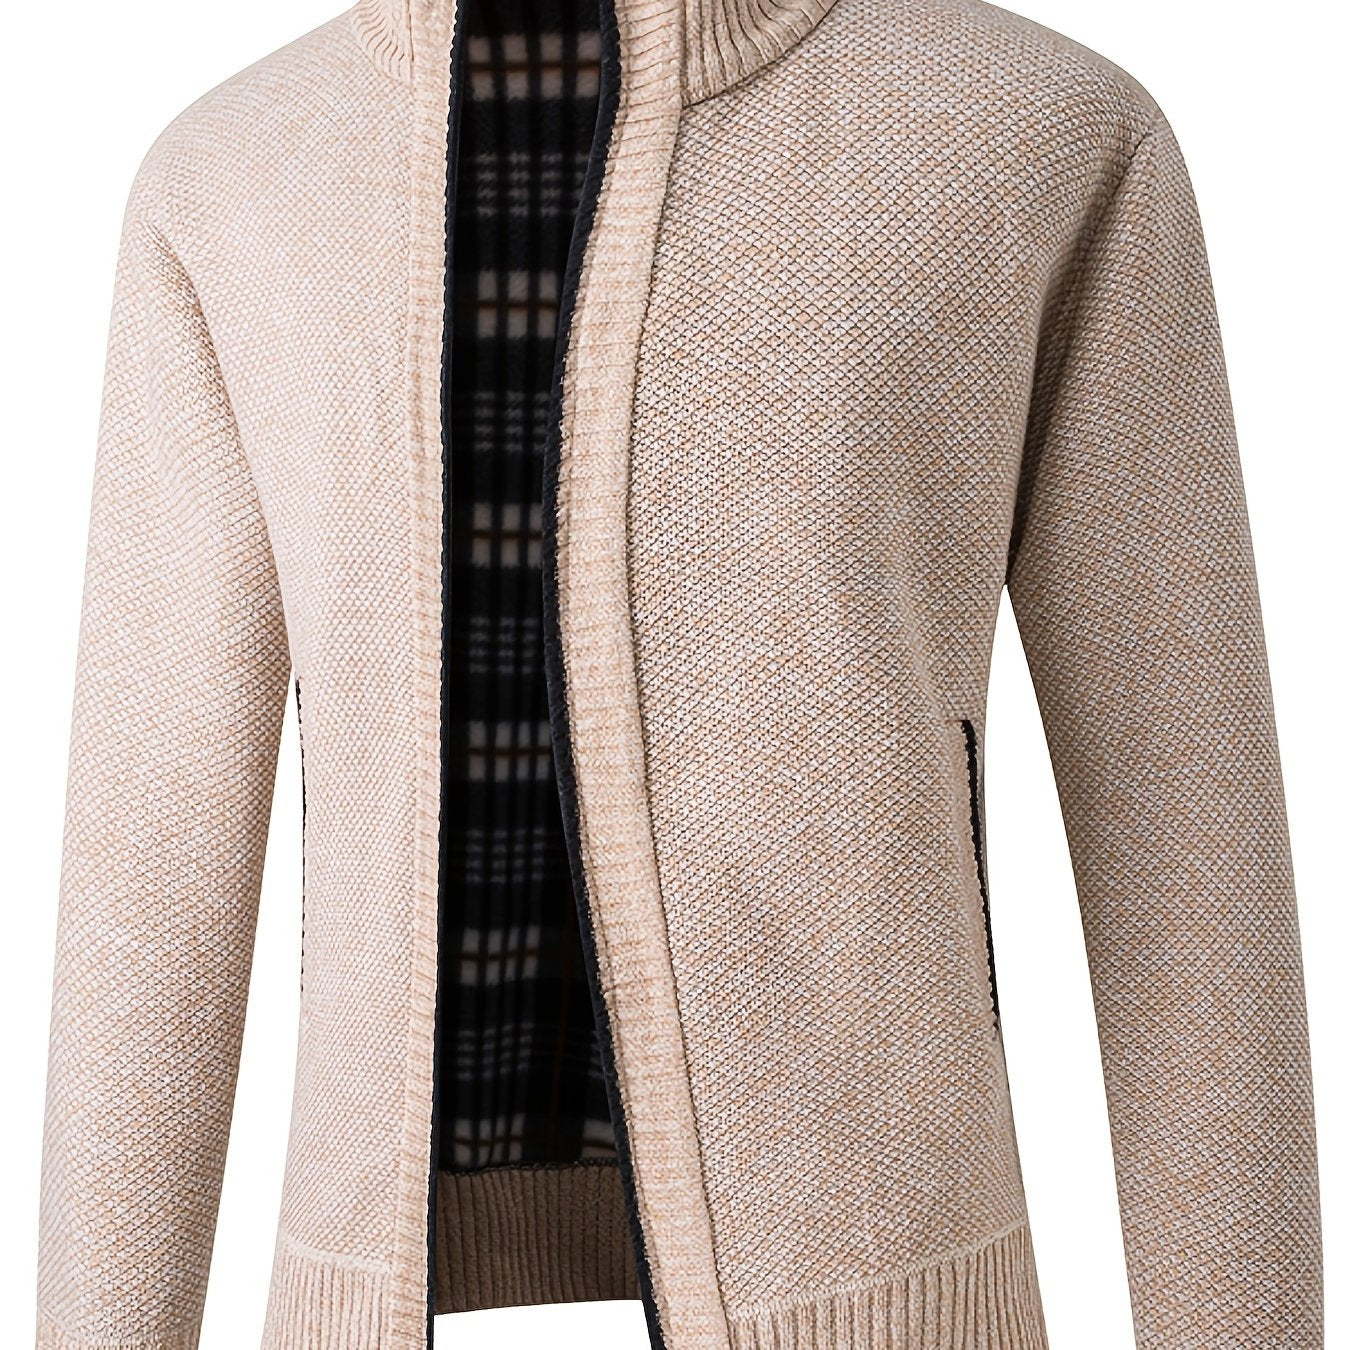 Two Sizes Smaller,  Men's Autumn And Winter Zipper Knitted Cardigan, Fleece Warm Sweater Jacket Best Sellers